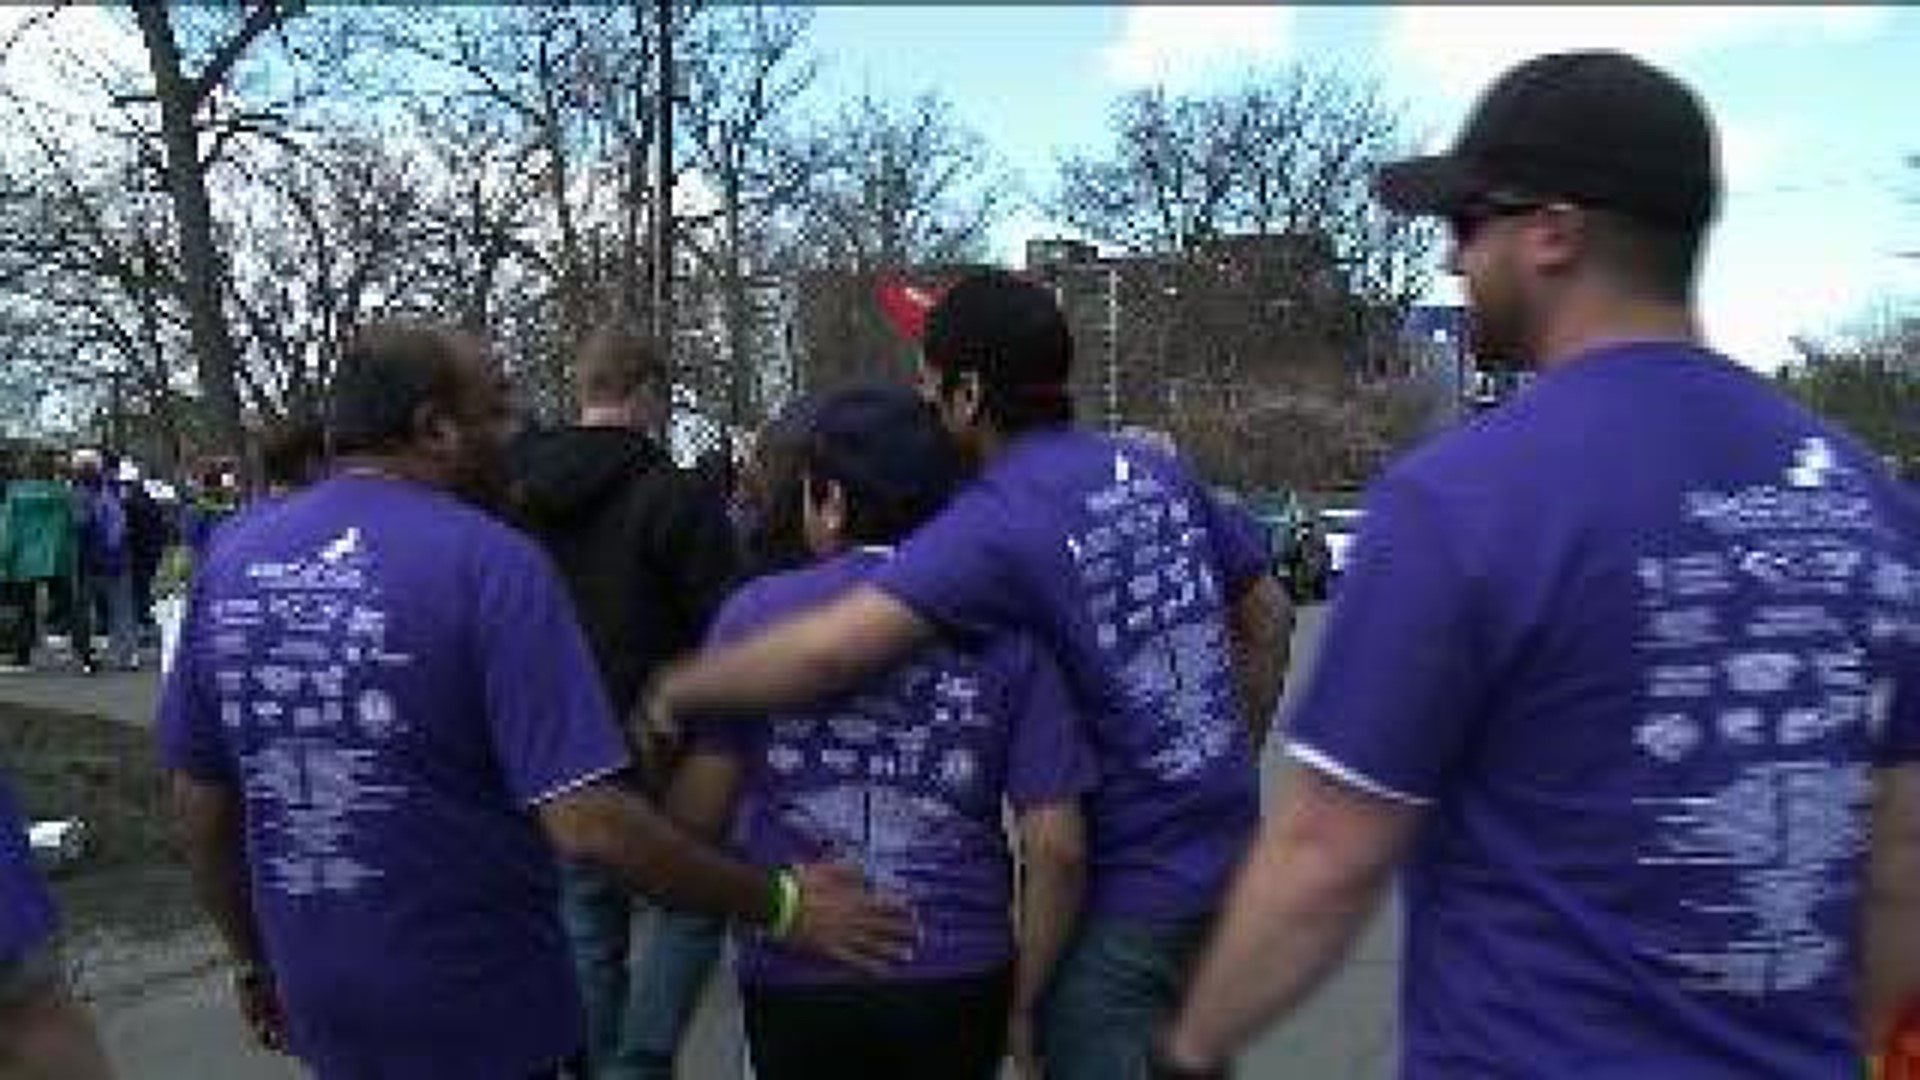 Two Thousand Show Up for Autism Awareness Event in Scranton